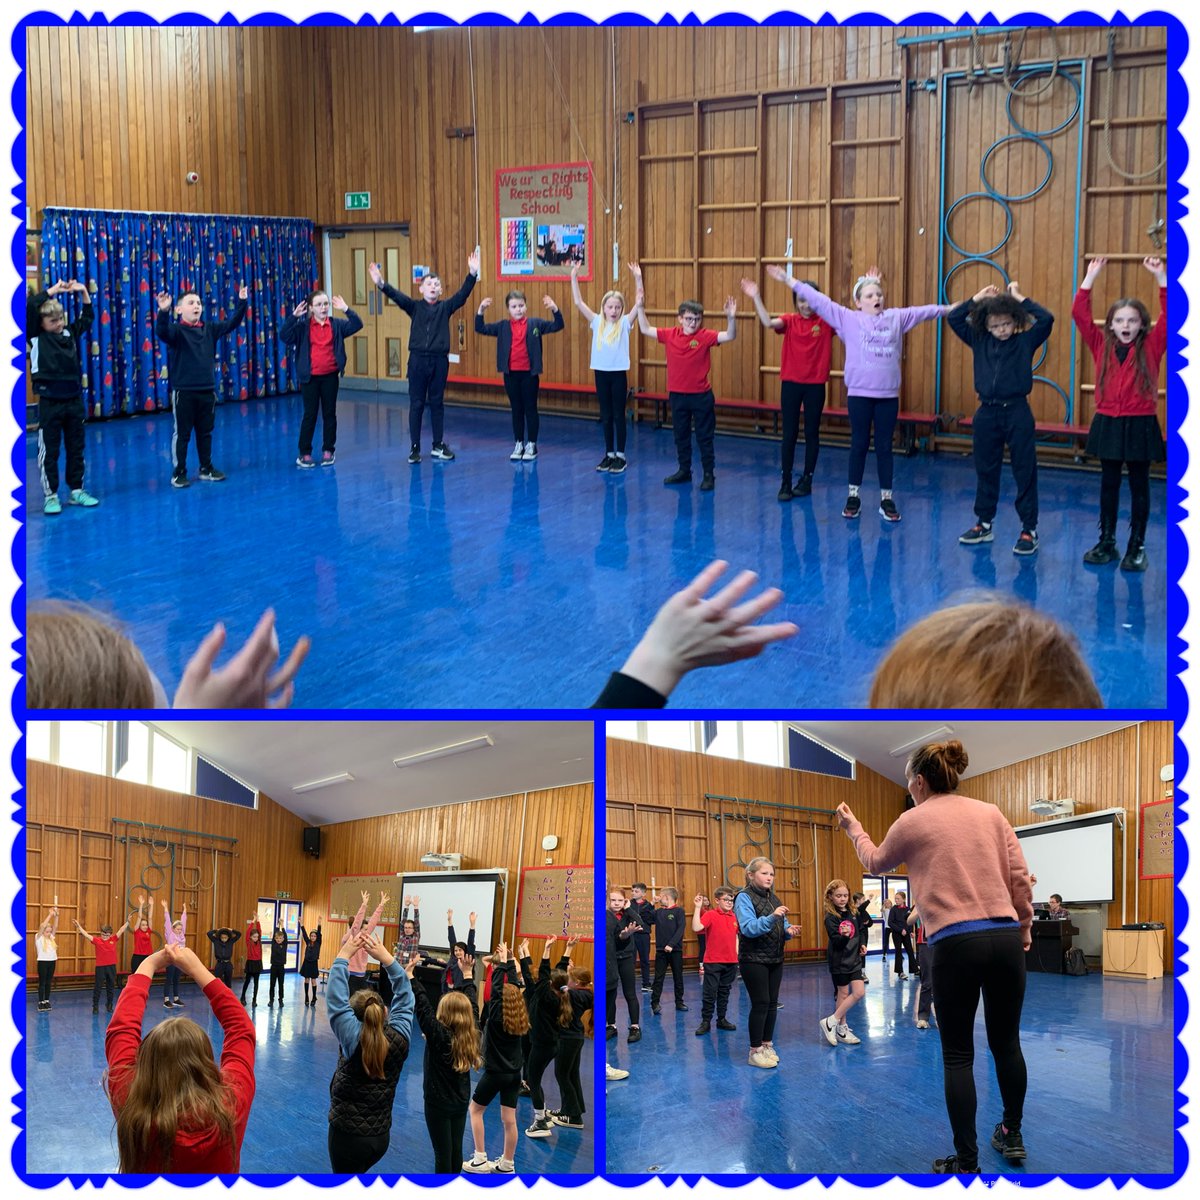 Dosbarth Helyg worked hard on the next scene in Tosca today with @WelshNatOpera and developing their confidence with circle singing for our performance! #AmbitiousAlys #TEAMOaklands